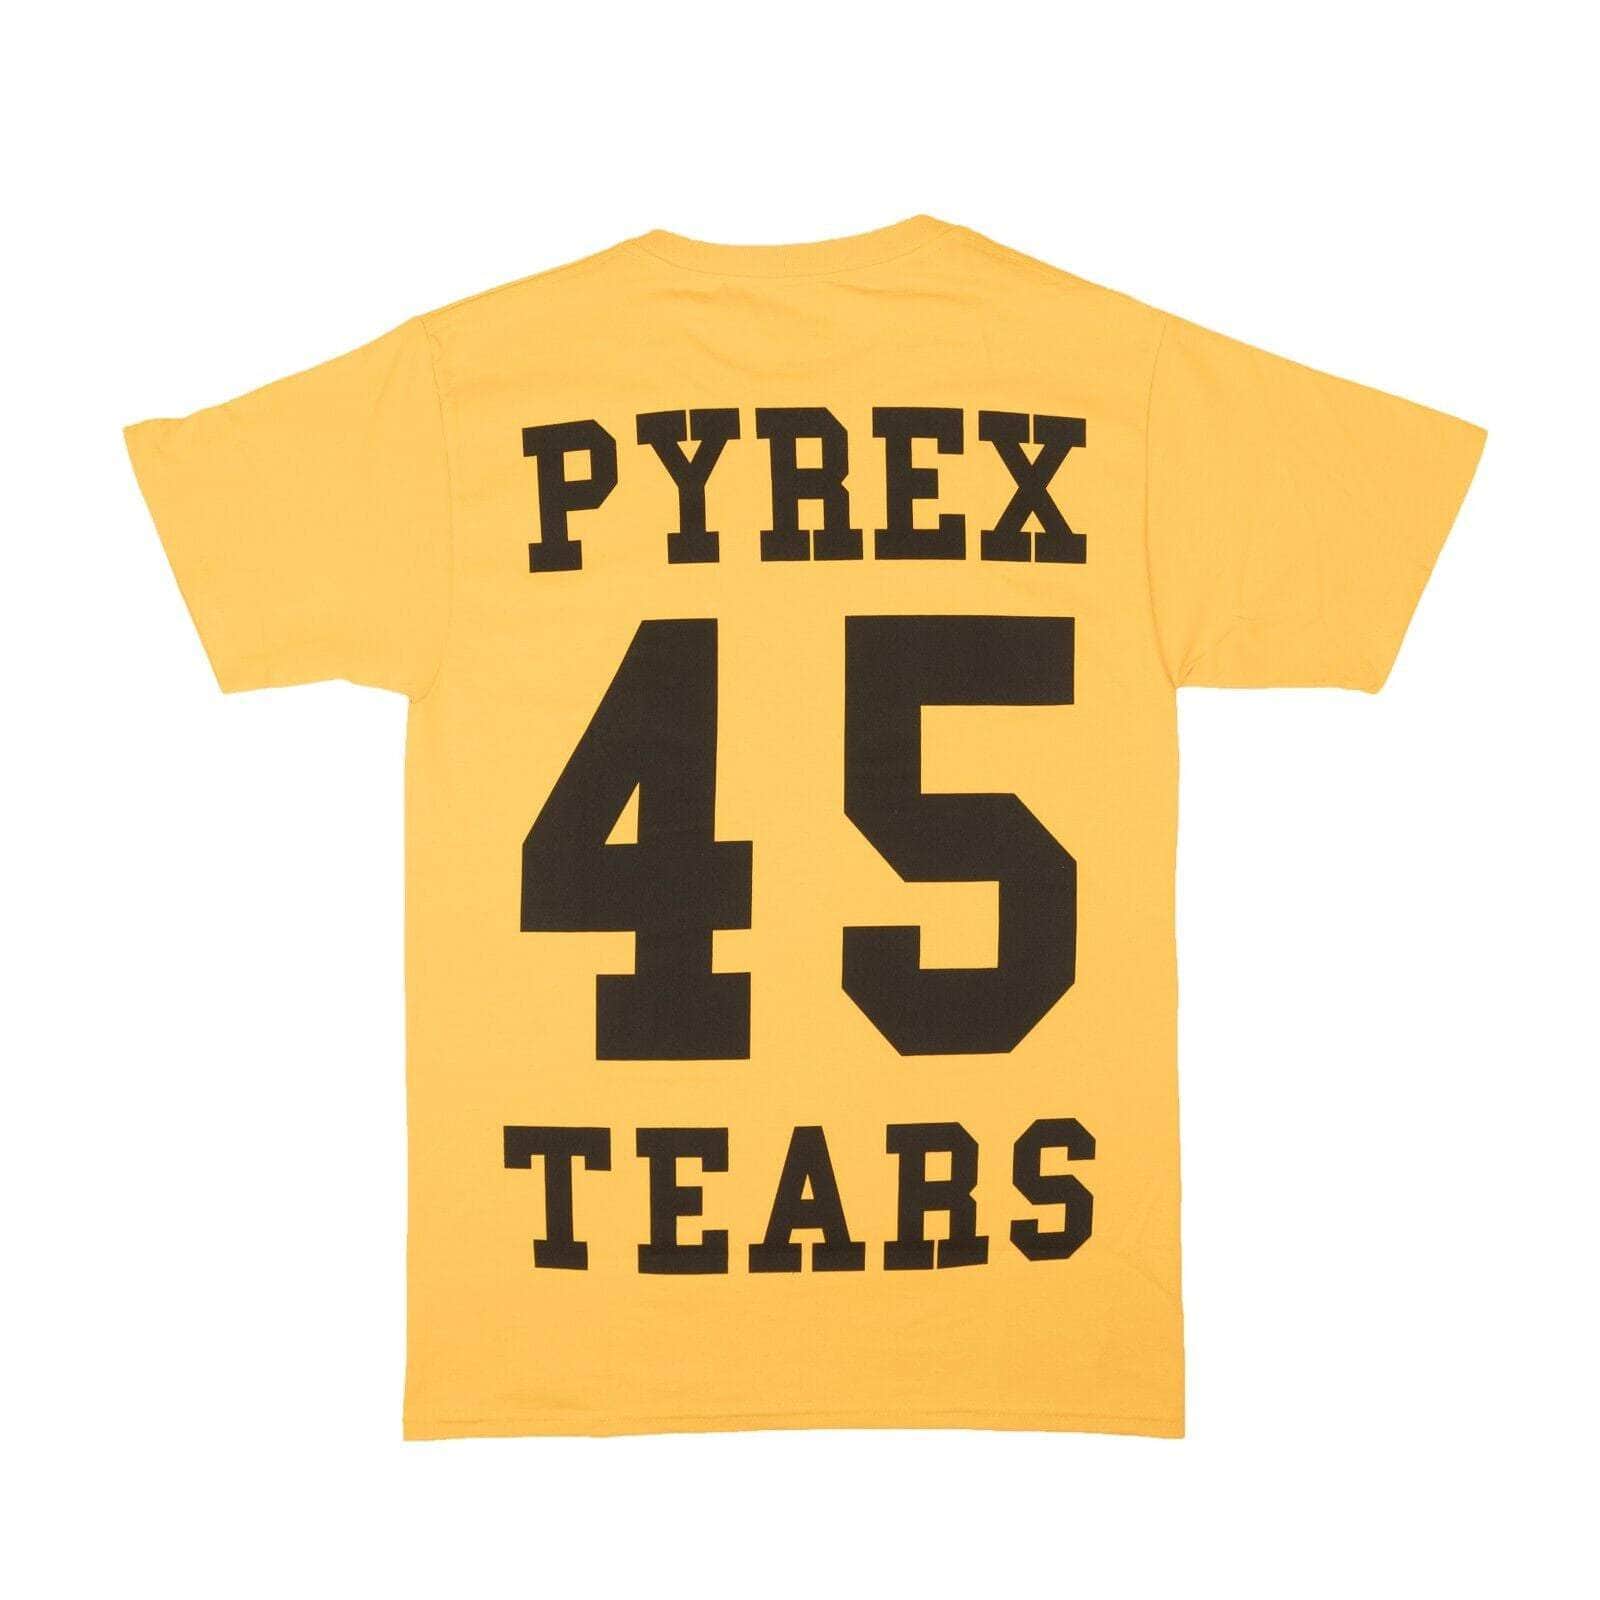 Denim Tears channelenable-all, chicmi, couponcollection, denim-tears, gender-mens, main-clothing, mens-shoes, size-l, size-m, size-s, size-xl, under-250 X Pyrex Yellow Short Sleeve T-Shirt